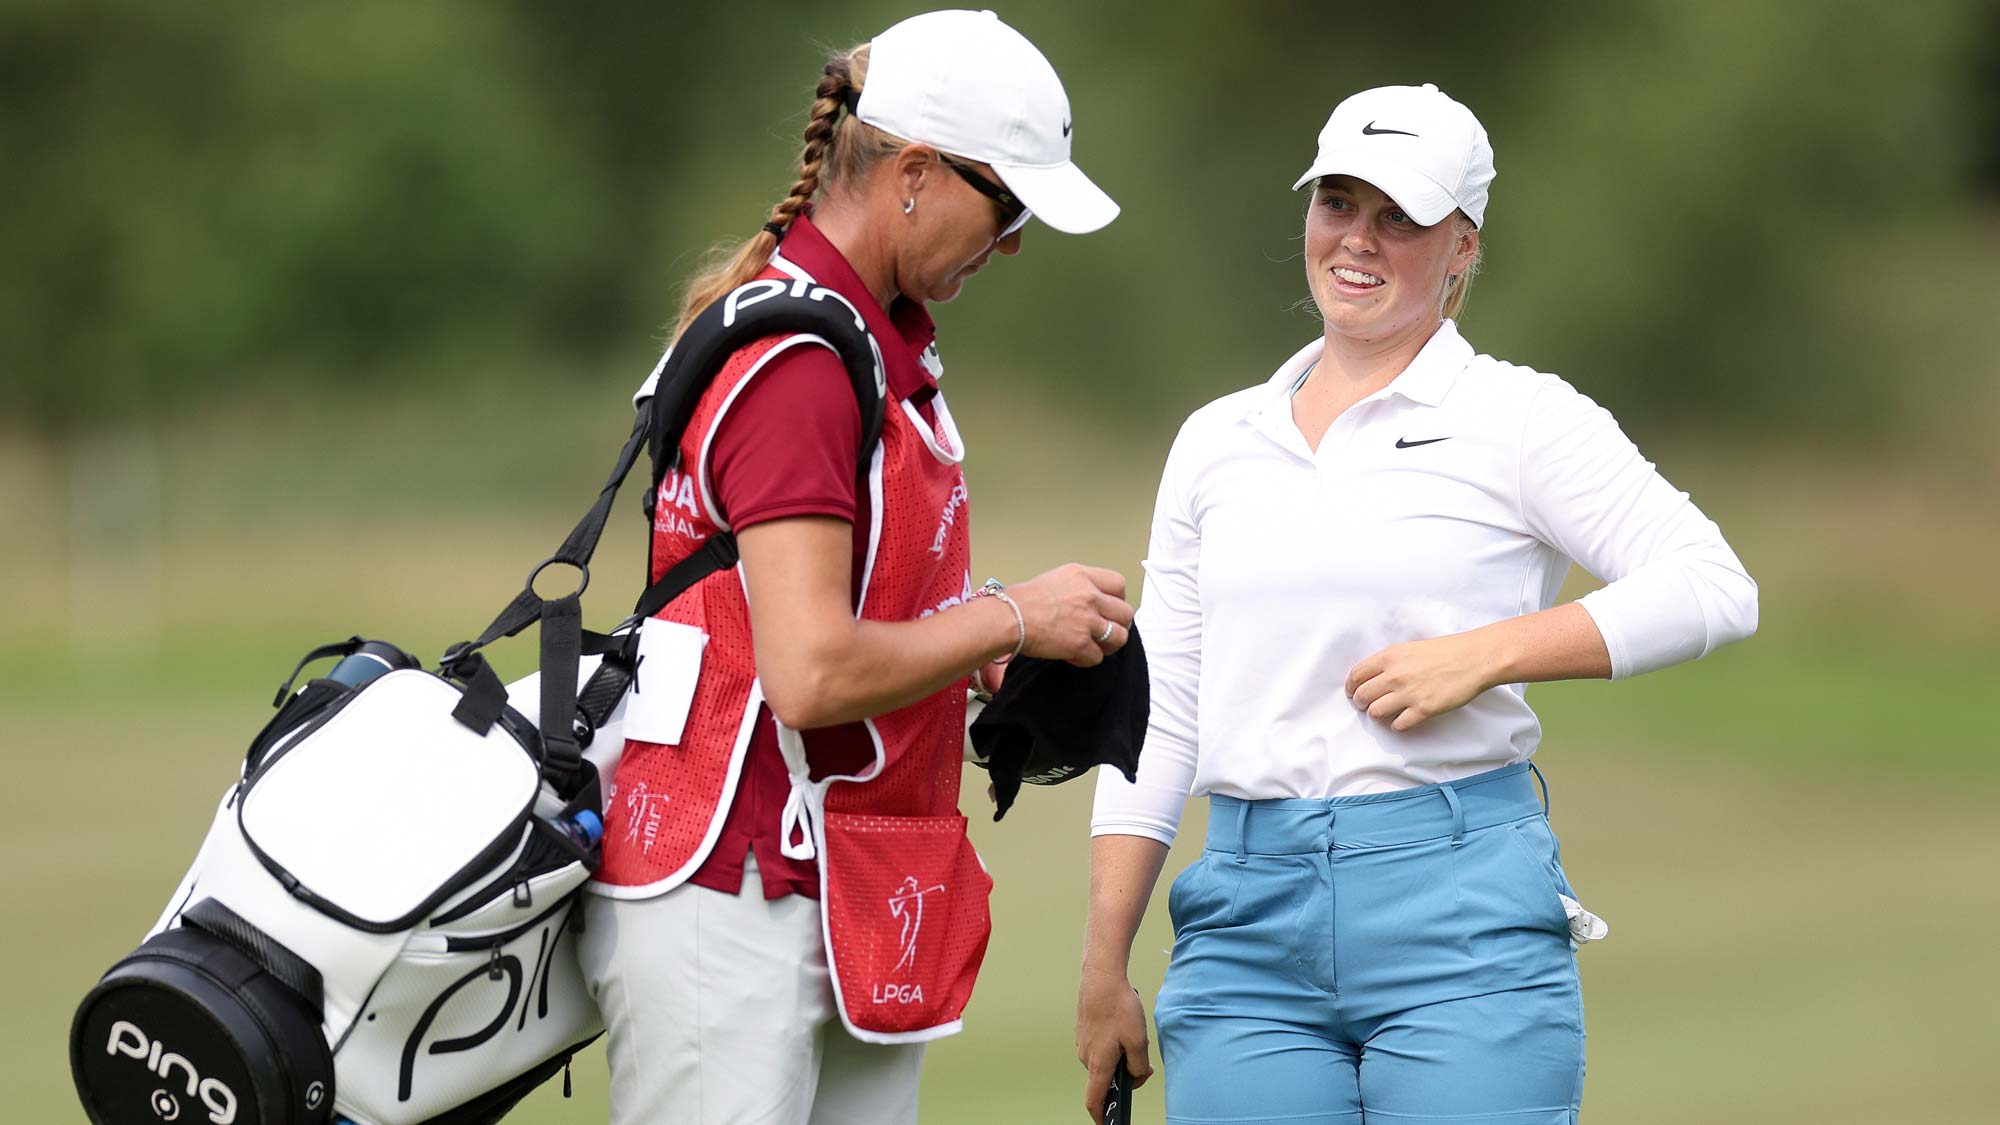 Maja Stark of Sweden talks to their caddie on the 2nd hole during Day Four of the ISPS Handa World Invitational presented by AVIV Clinics